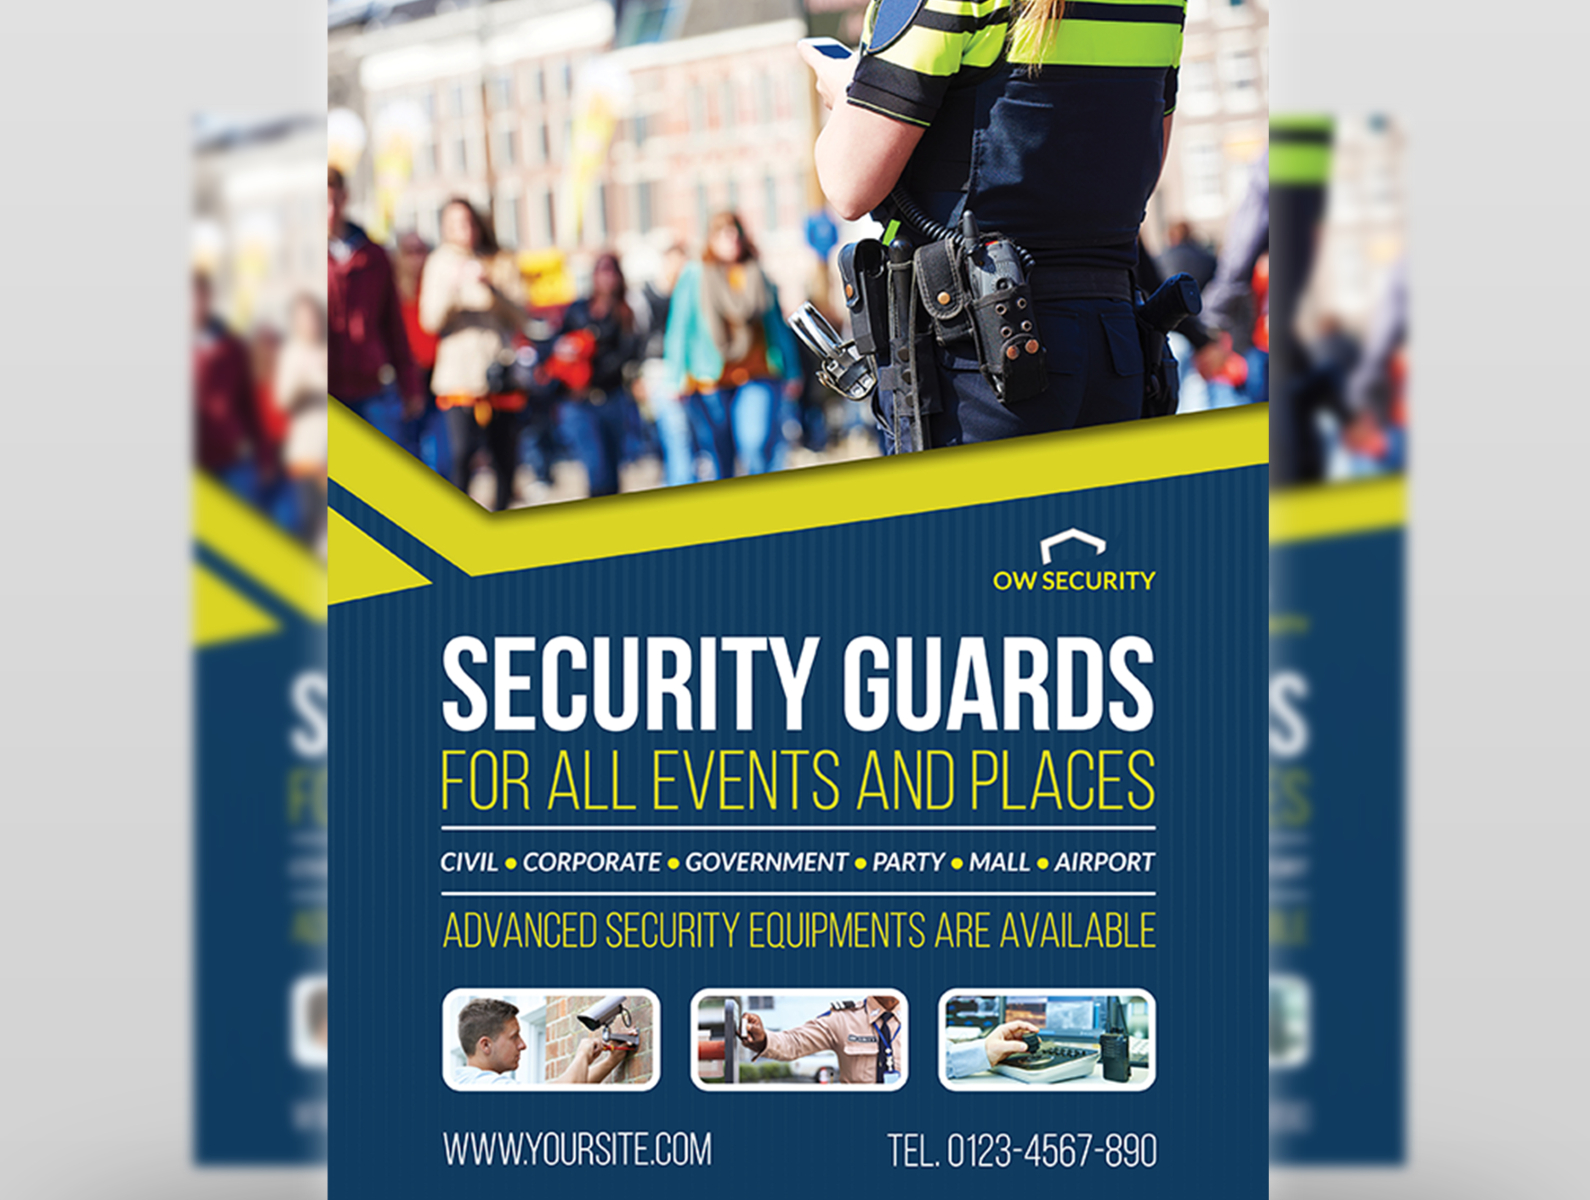 Security Guards Flyer Template by OWPictures on Dribbble